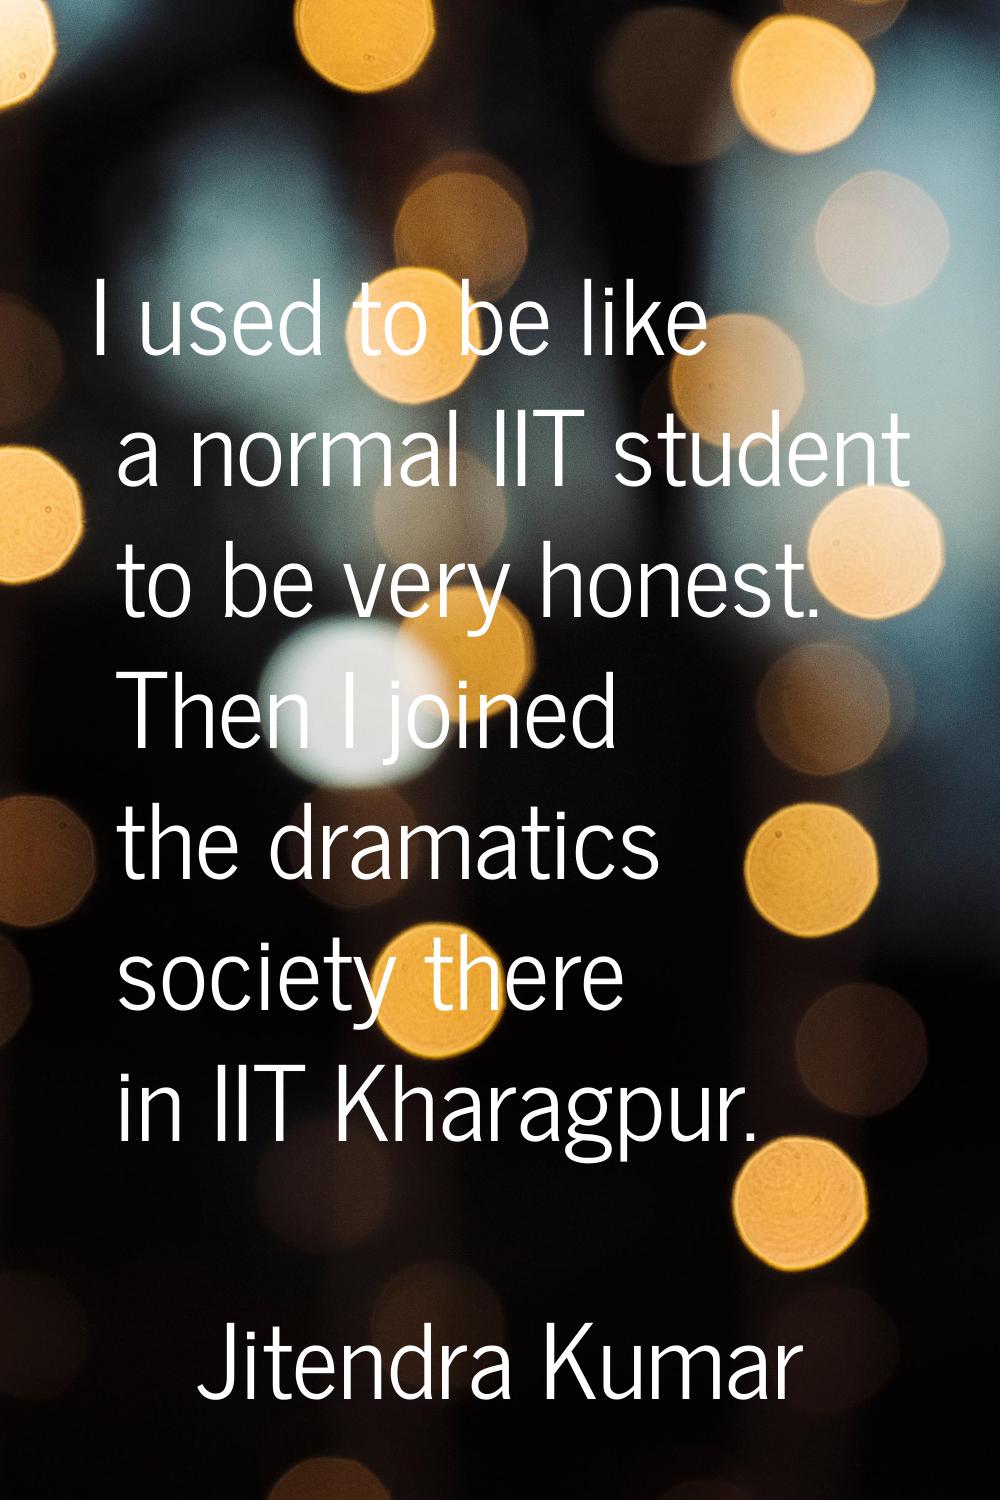 I used to be like a normal IIT student to be very honest. Then I joined the dramatics society there